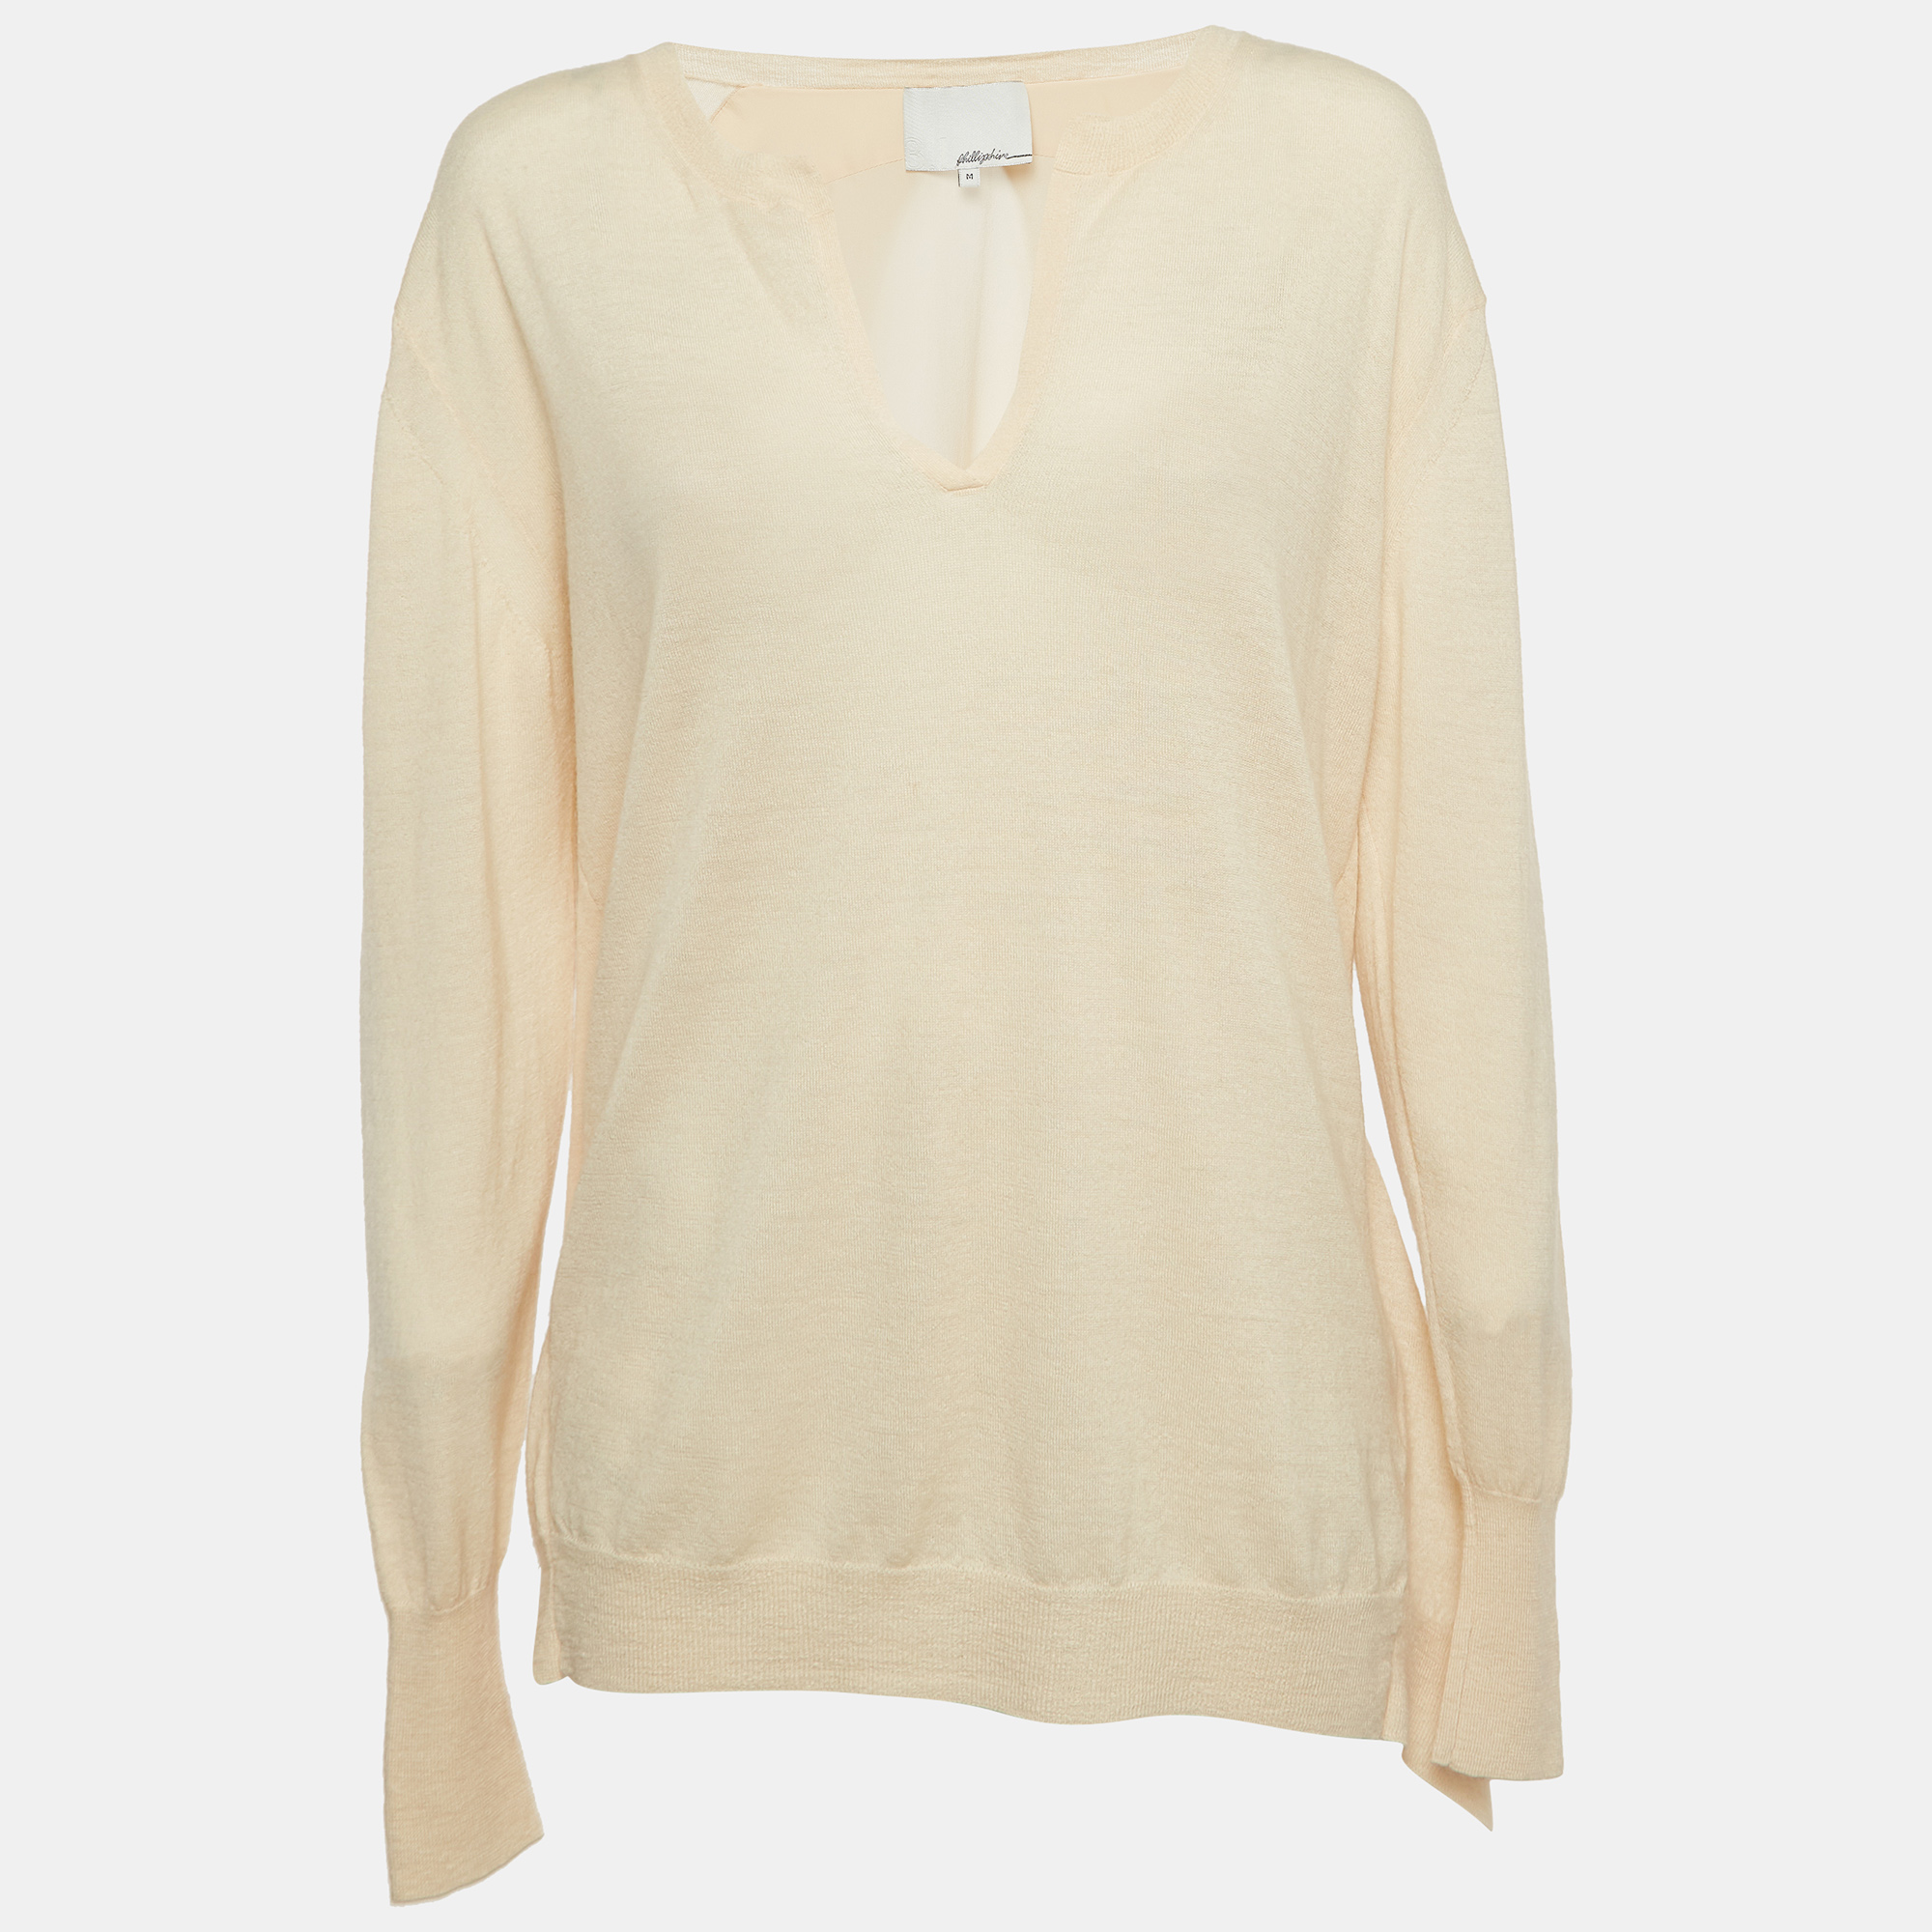 Pre-owned 3.1 Phillip Lim / フィリップ リム Beige Wool Blend V-neck Sweater M